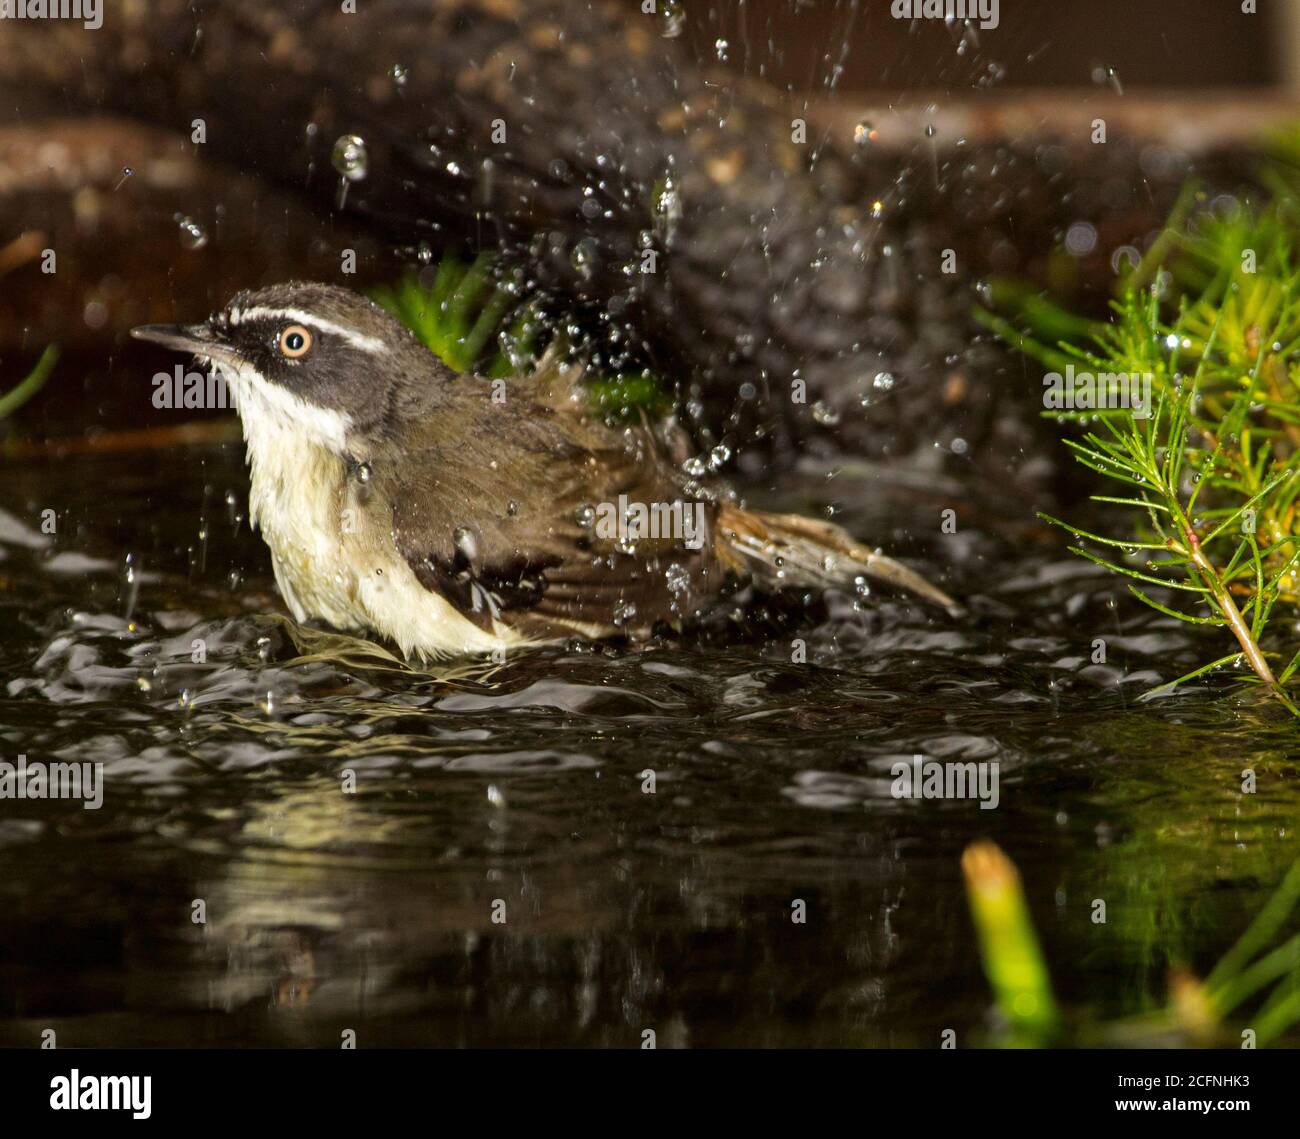 White-browed scrubwren, Sericornis frontalis, bathing in water of small garden pond / bird bath with wings flapping and water spraying into the air Stock Photo